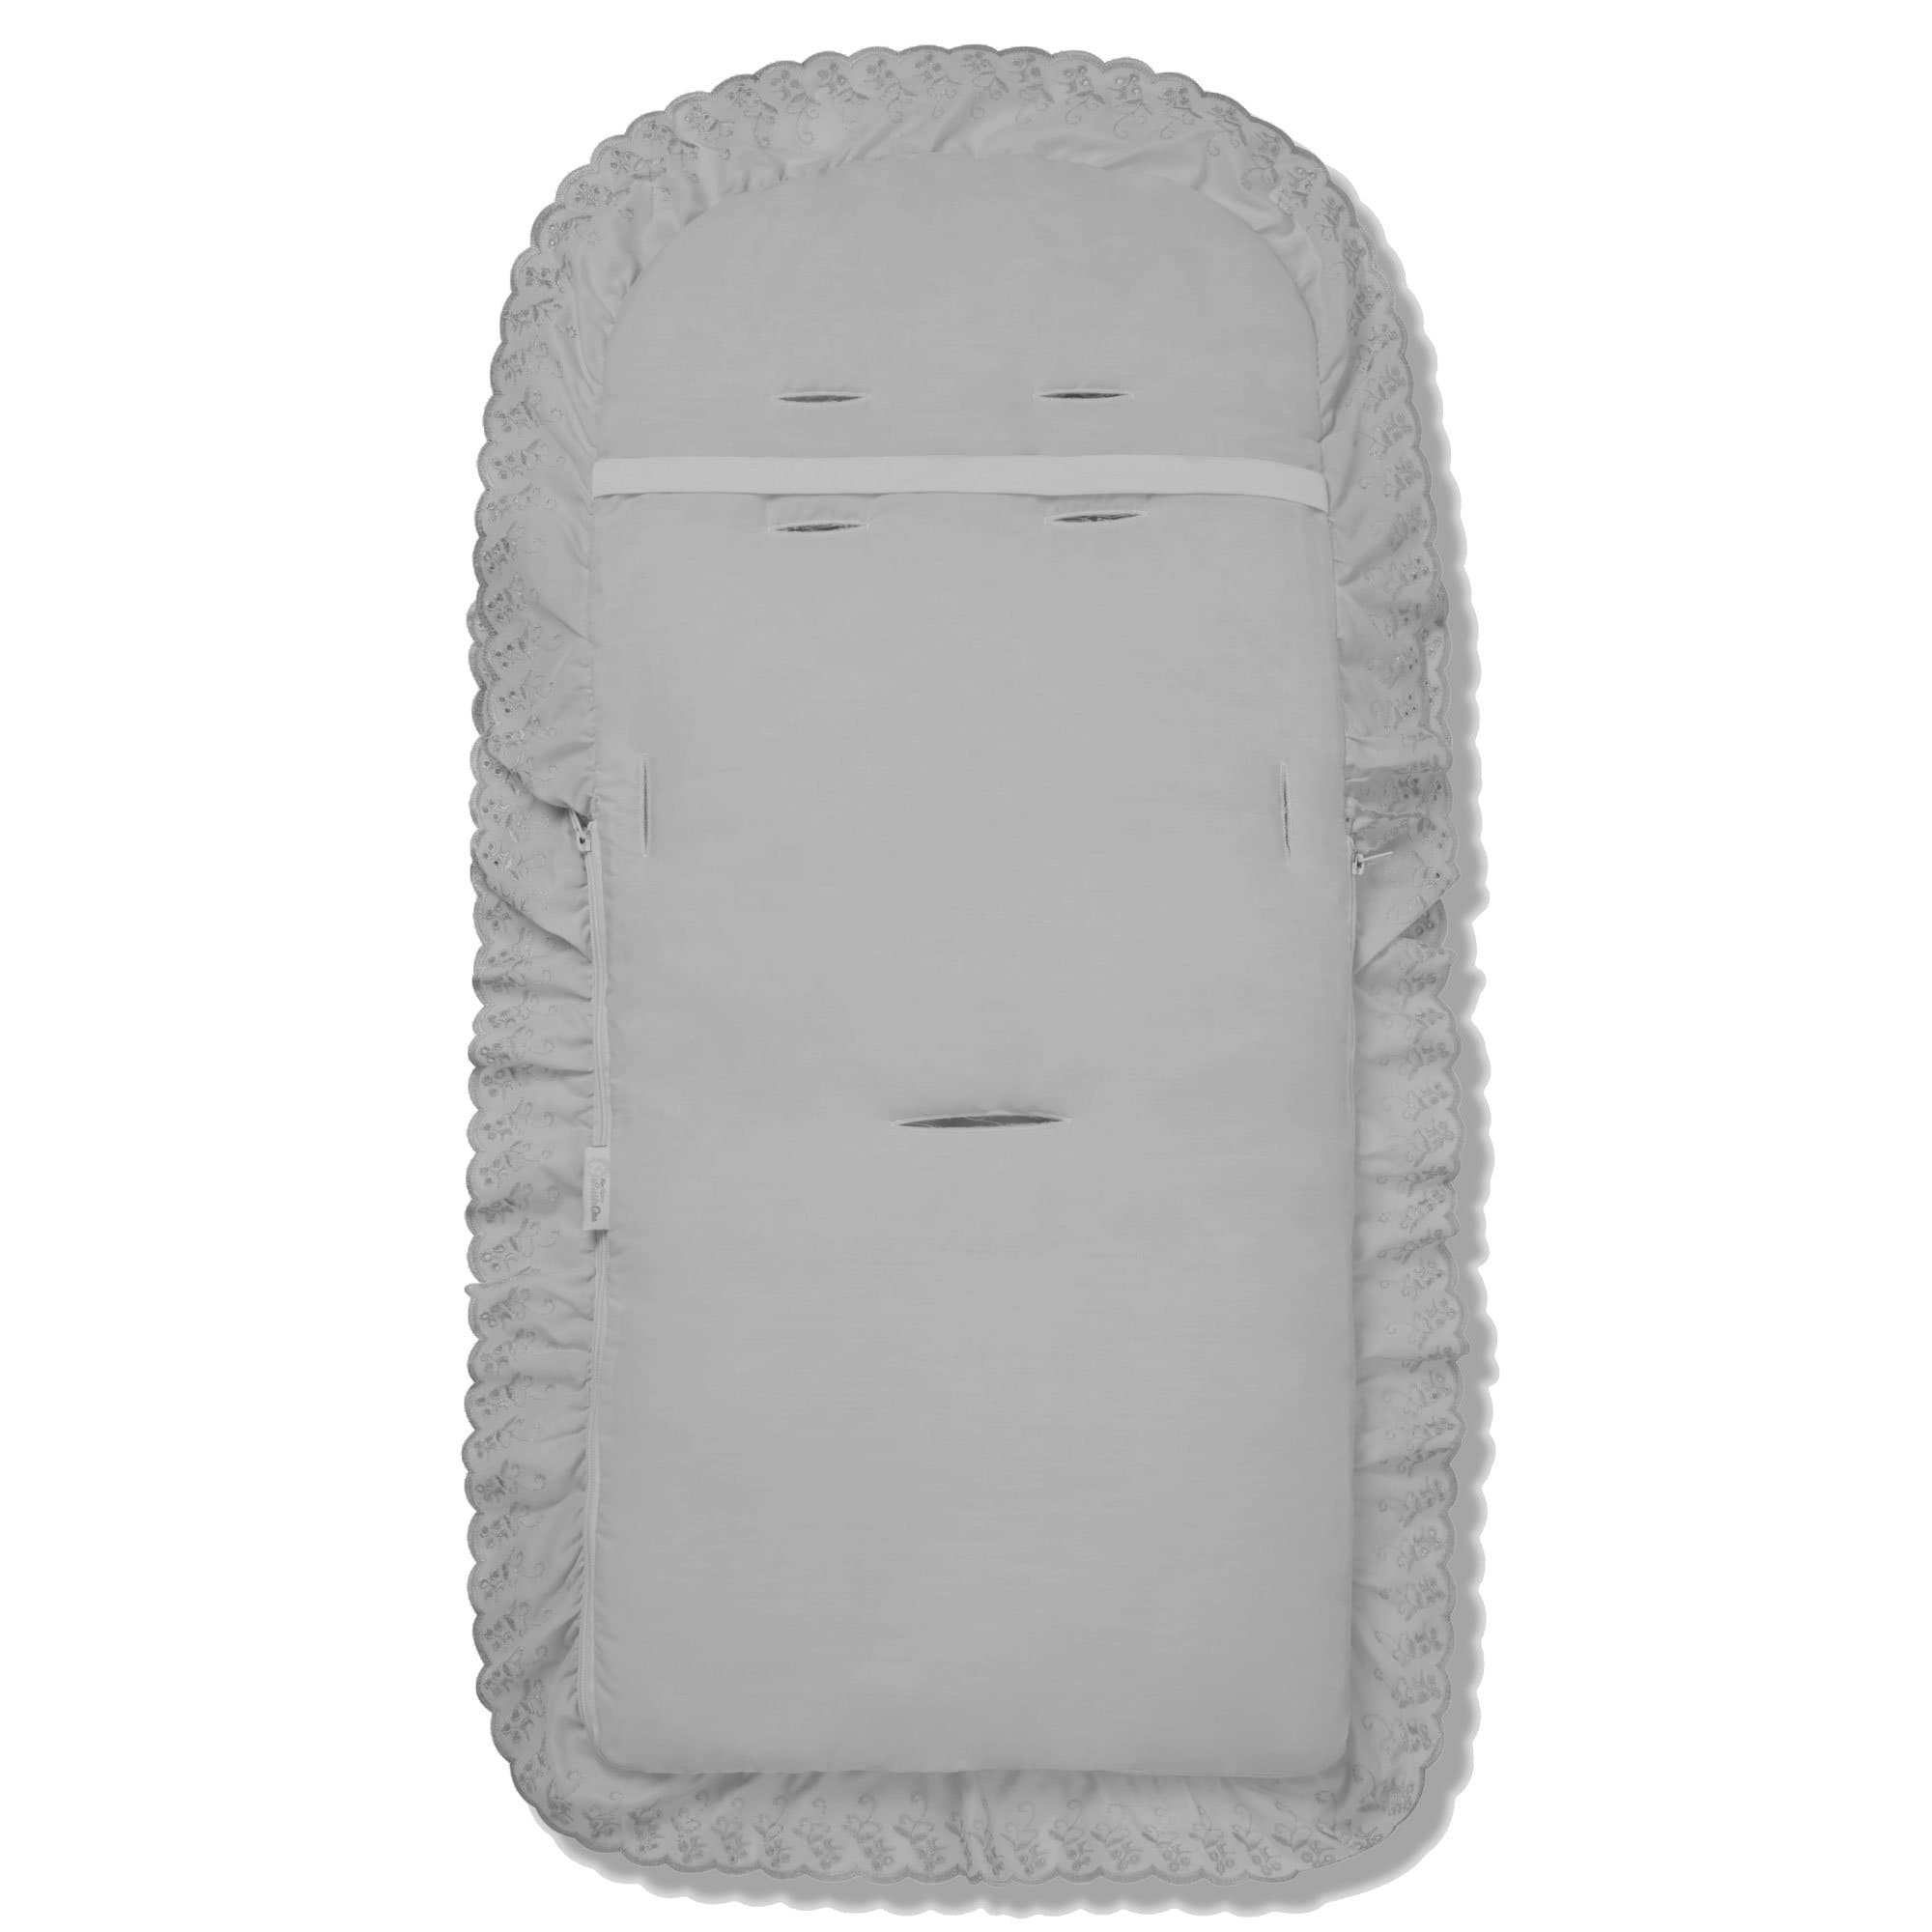 Broderie Anglaise Footmuff / Cosy Toes Compatible with Maclaren -  | For Your Little One